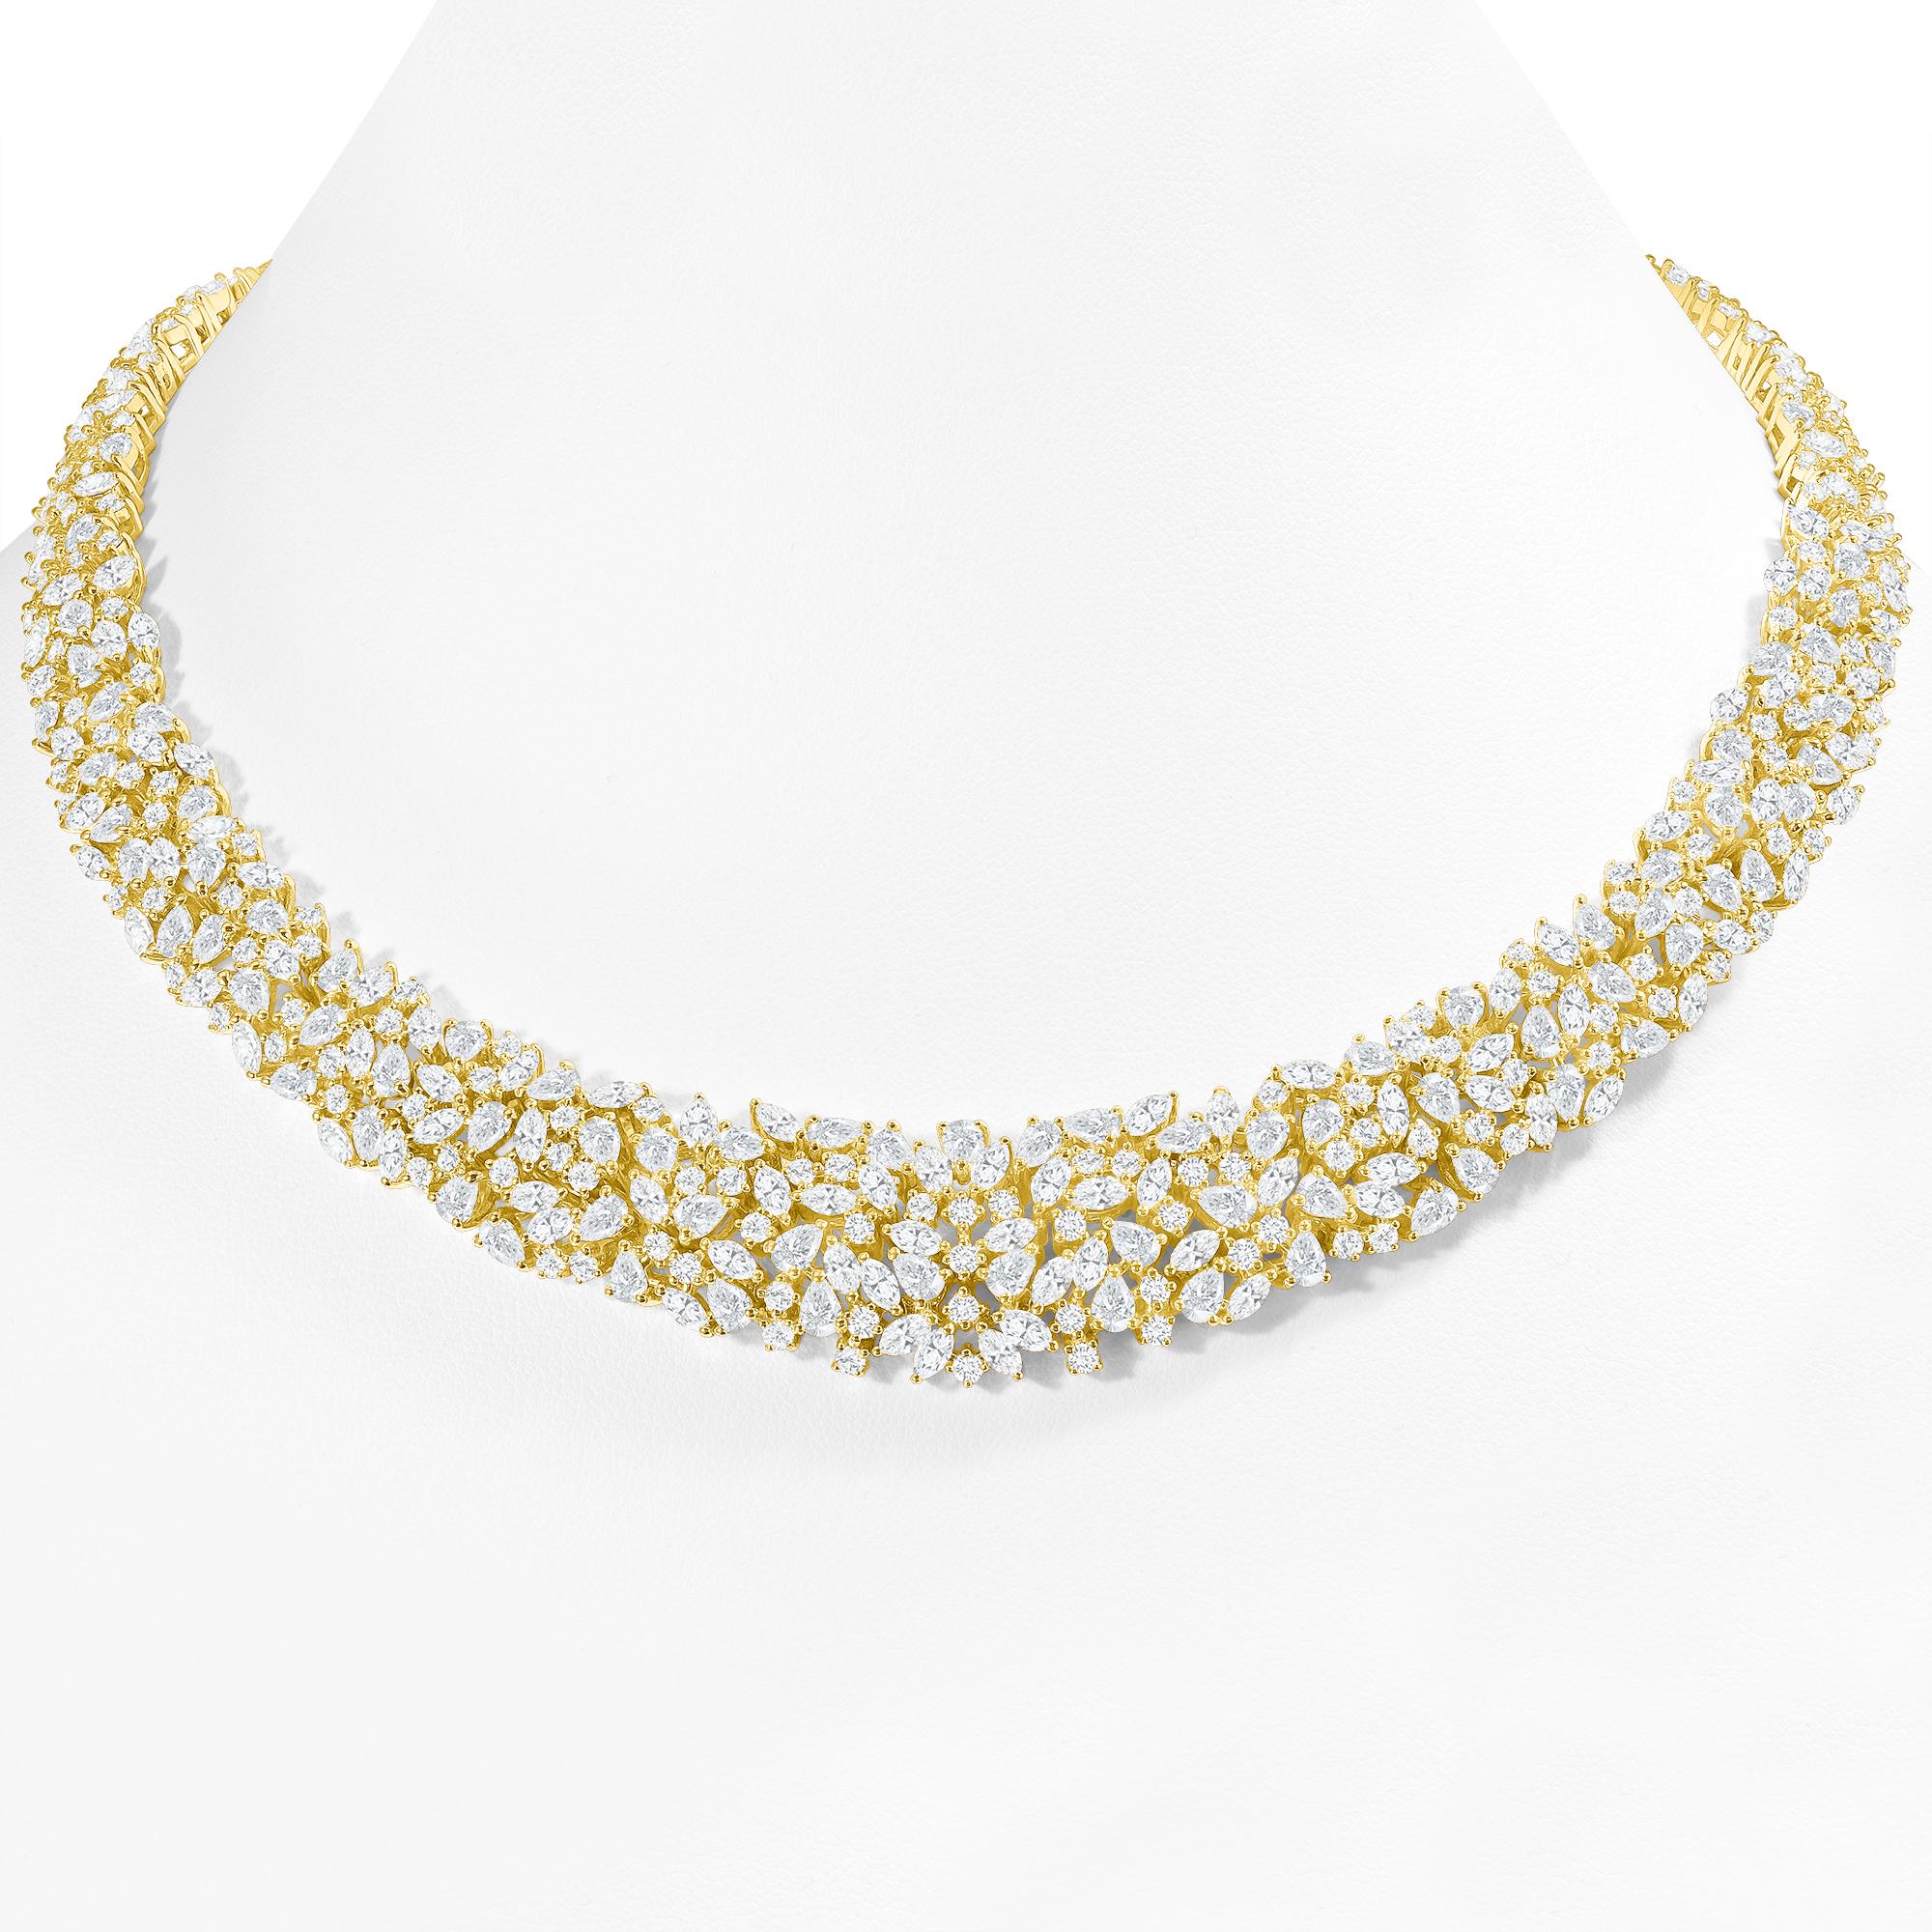 Round Cut 30 Carat Diamond Cluster Necklace, 18K Yellow Gold For Sale